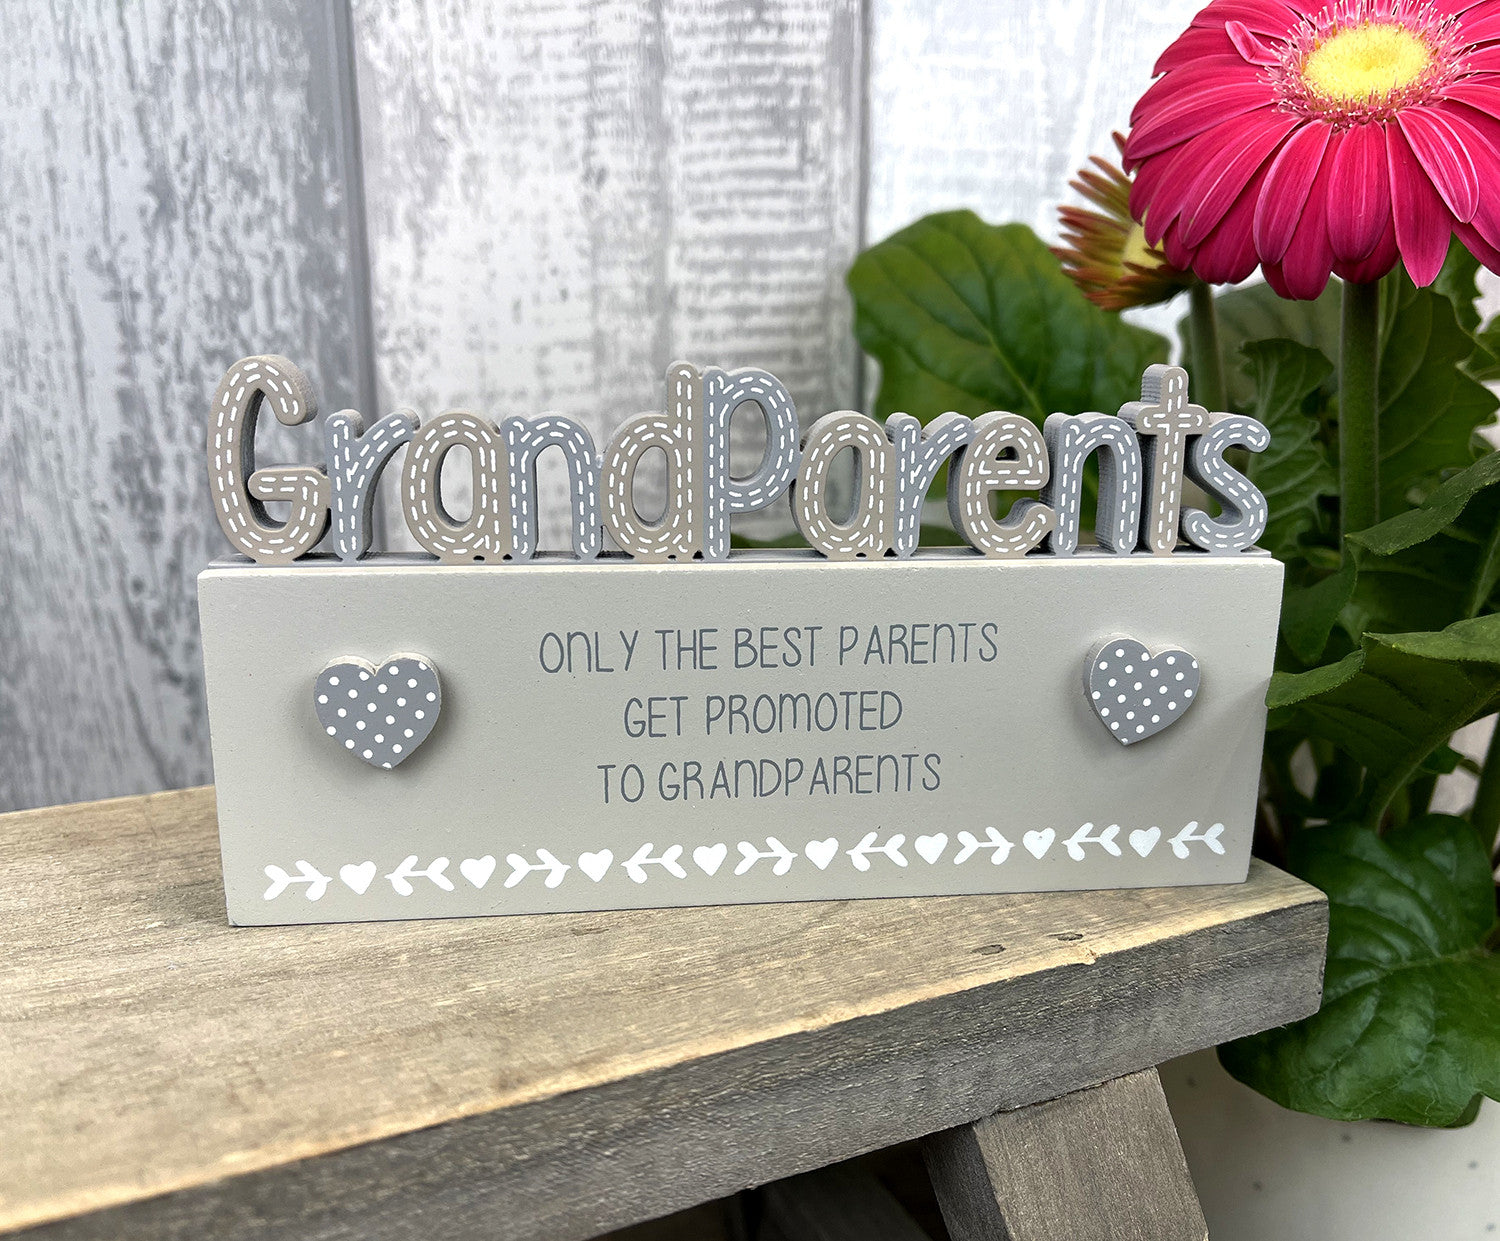 A grey standing plaque 'Grandparents' with the wording  'Only the best parents get promoted to grandparents'